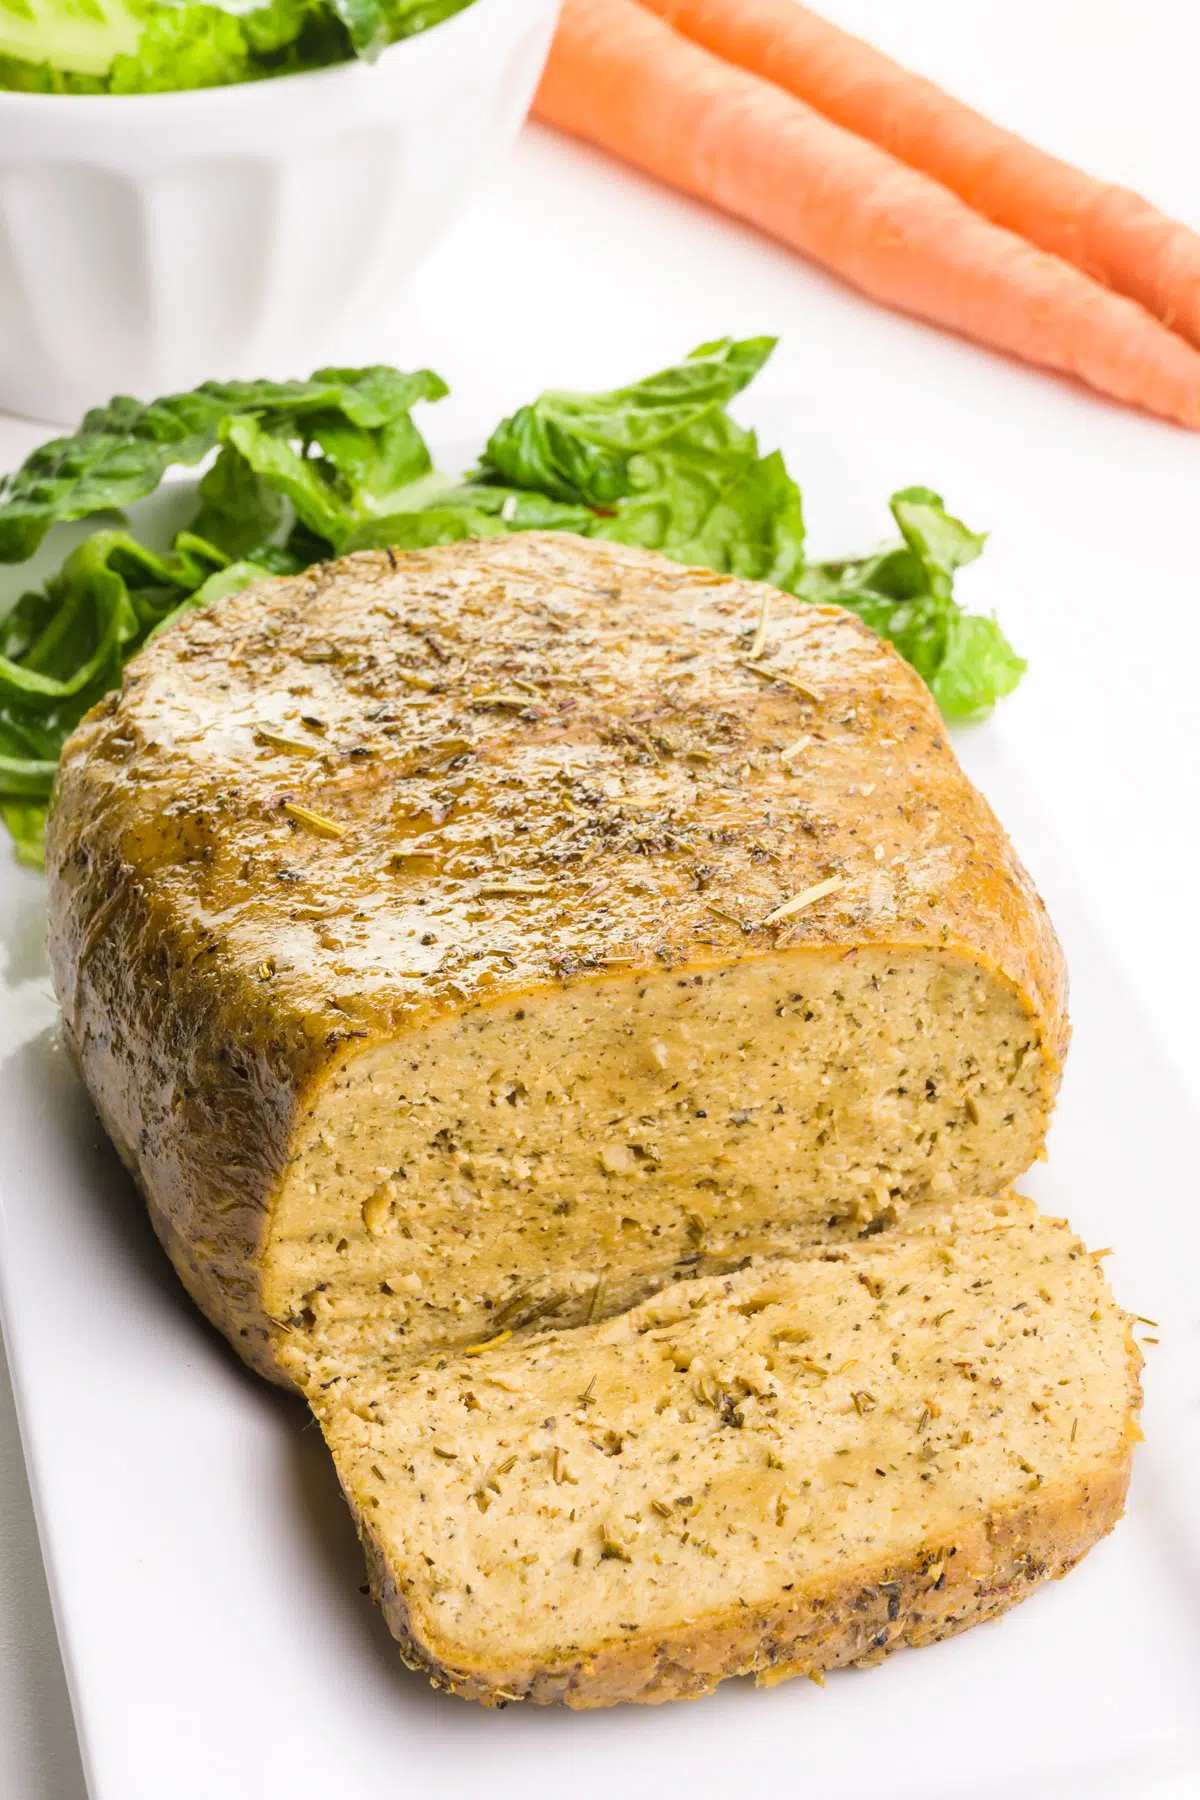 A vegan loaf has a slice cut out and greens in the background along with carrots.